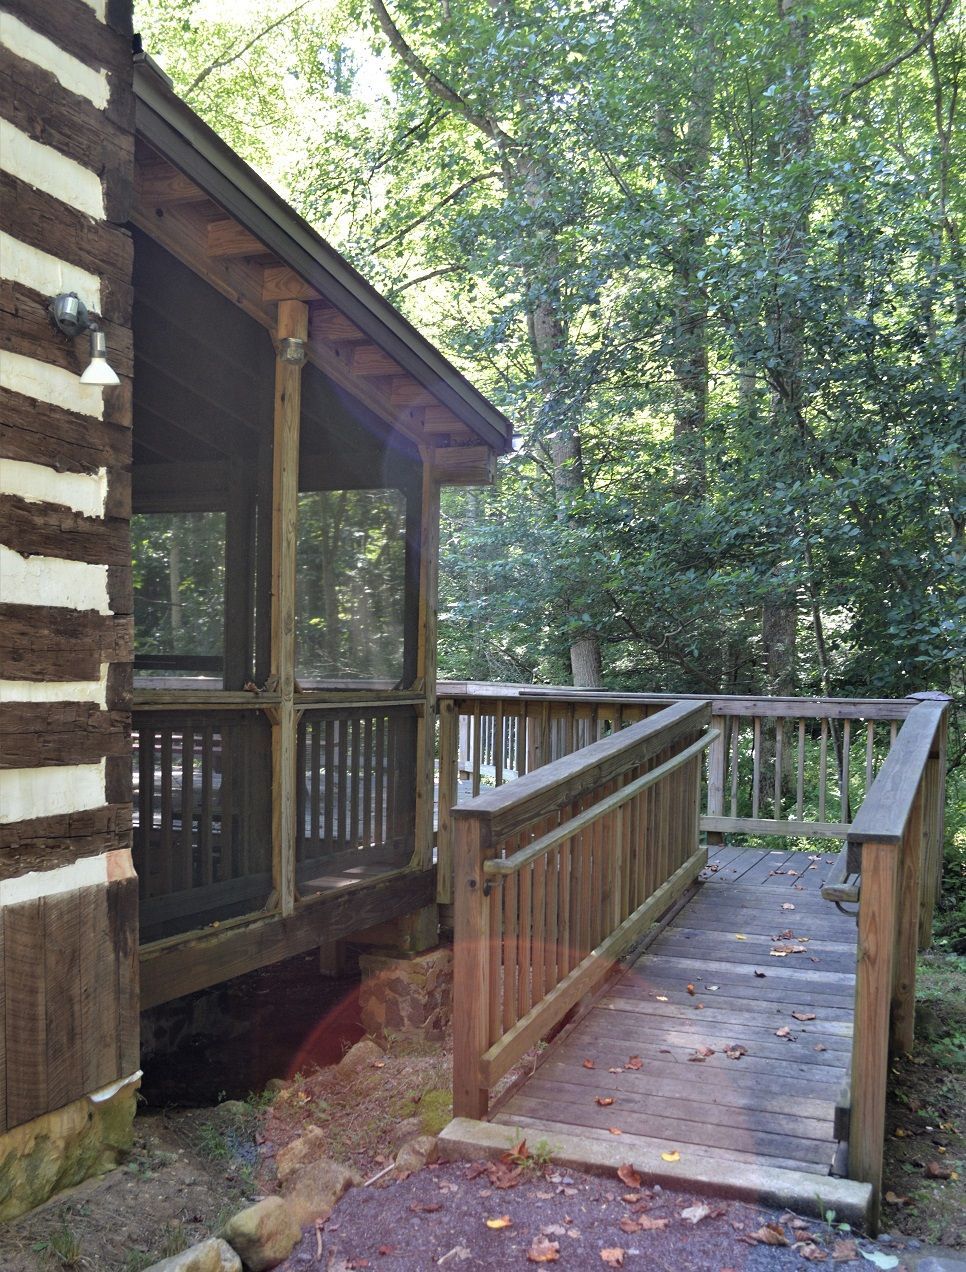 A view of the wooden porch at the Old Rag cabin.